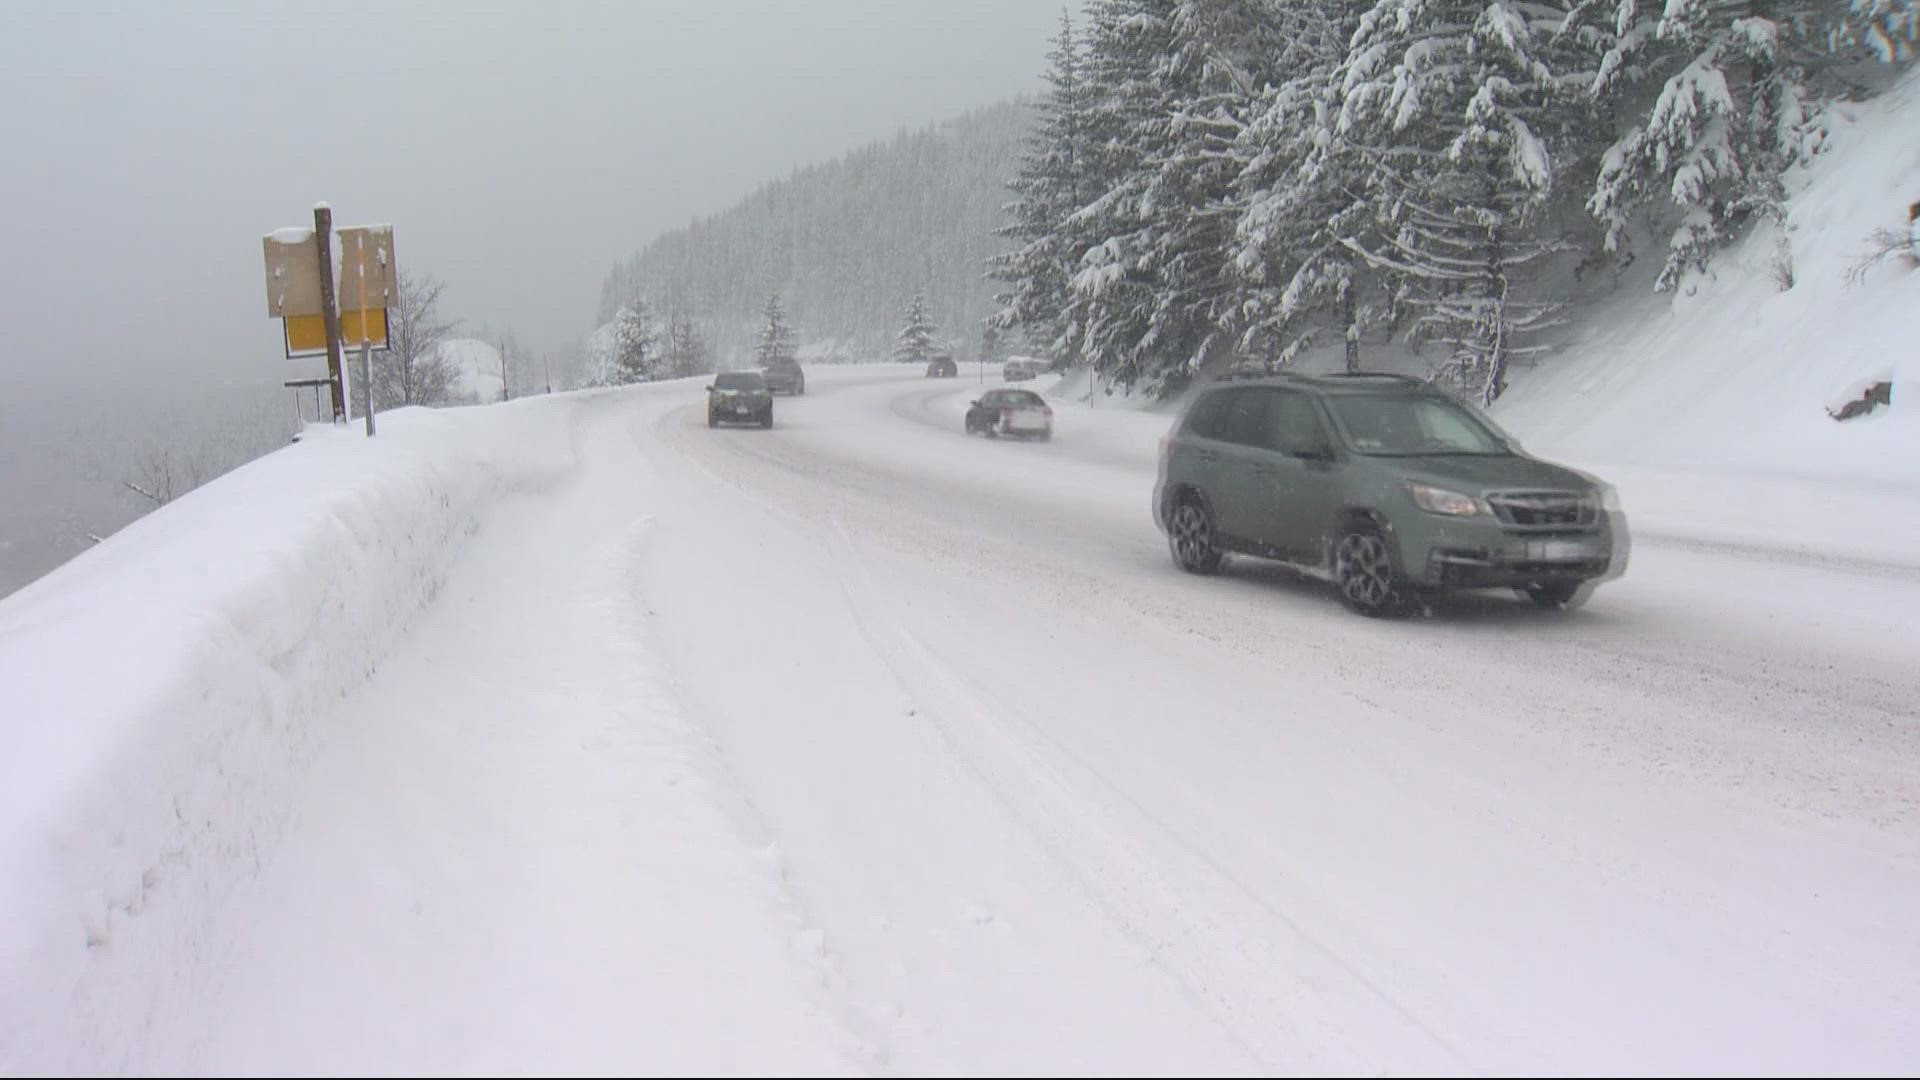 Photog Ken McCormick talked to drivers on Highway 26 for their best advice for driving in snow.